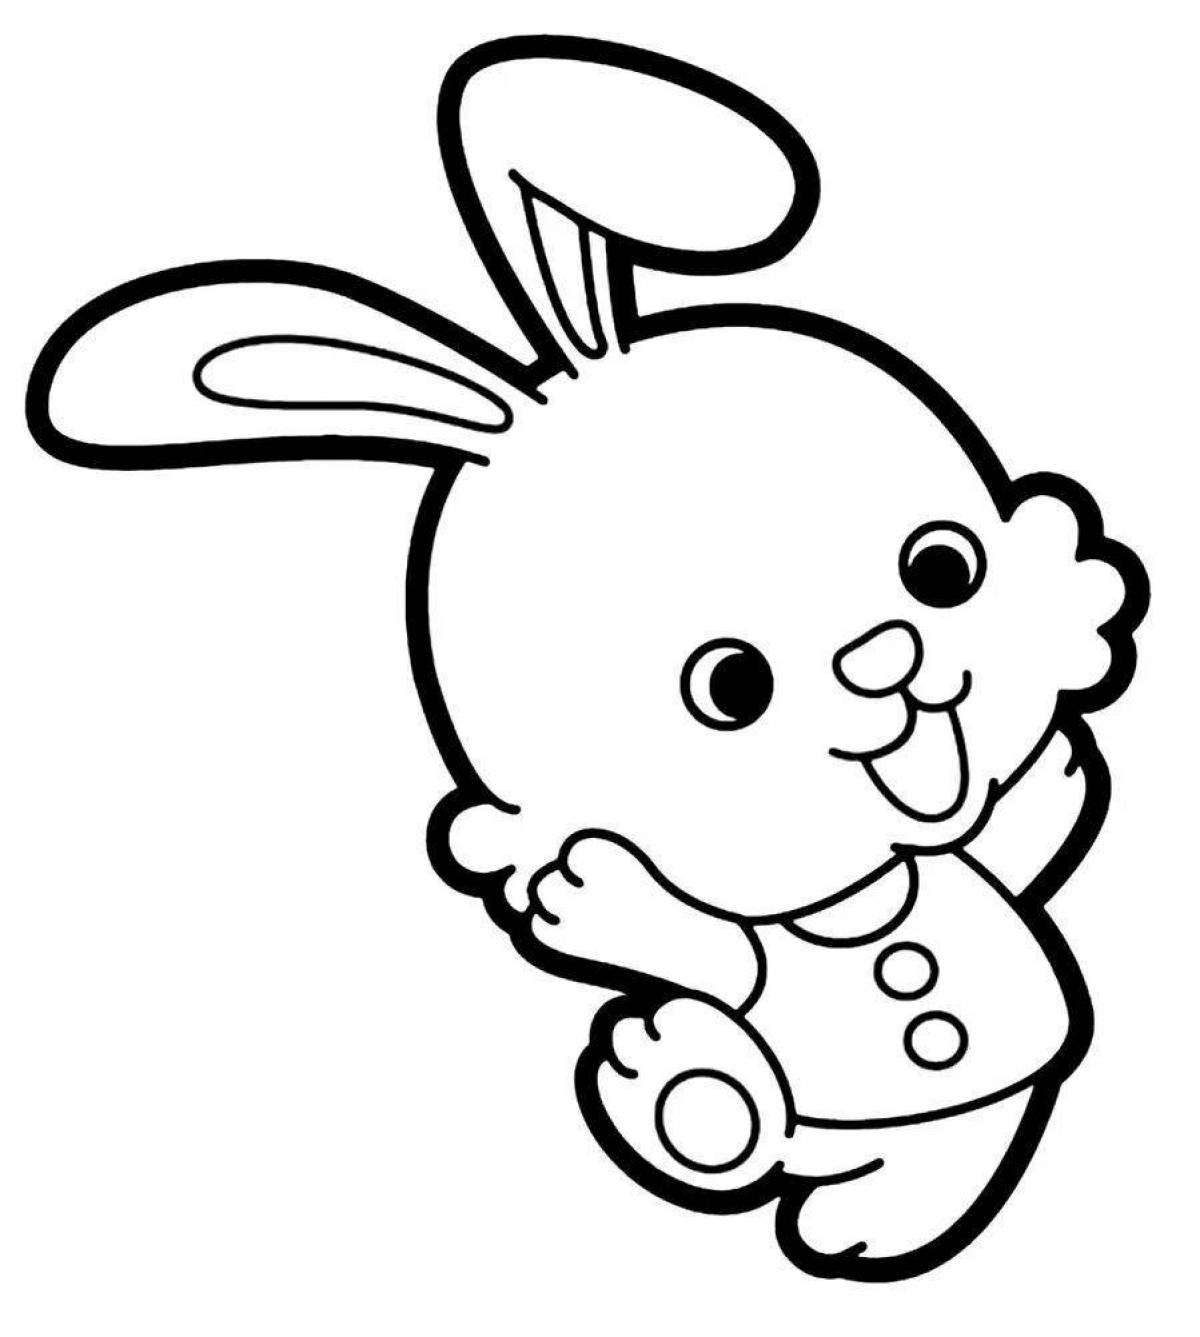 Waggly coloring page rabbit bunny